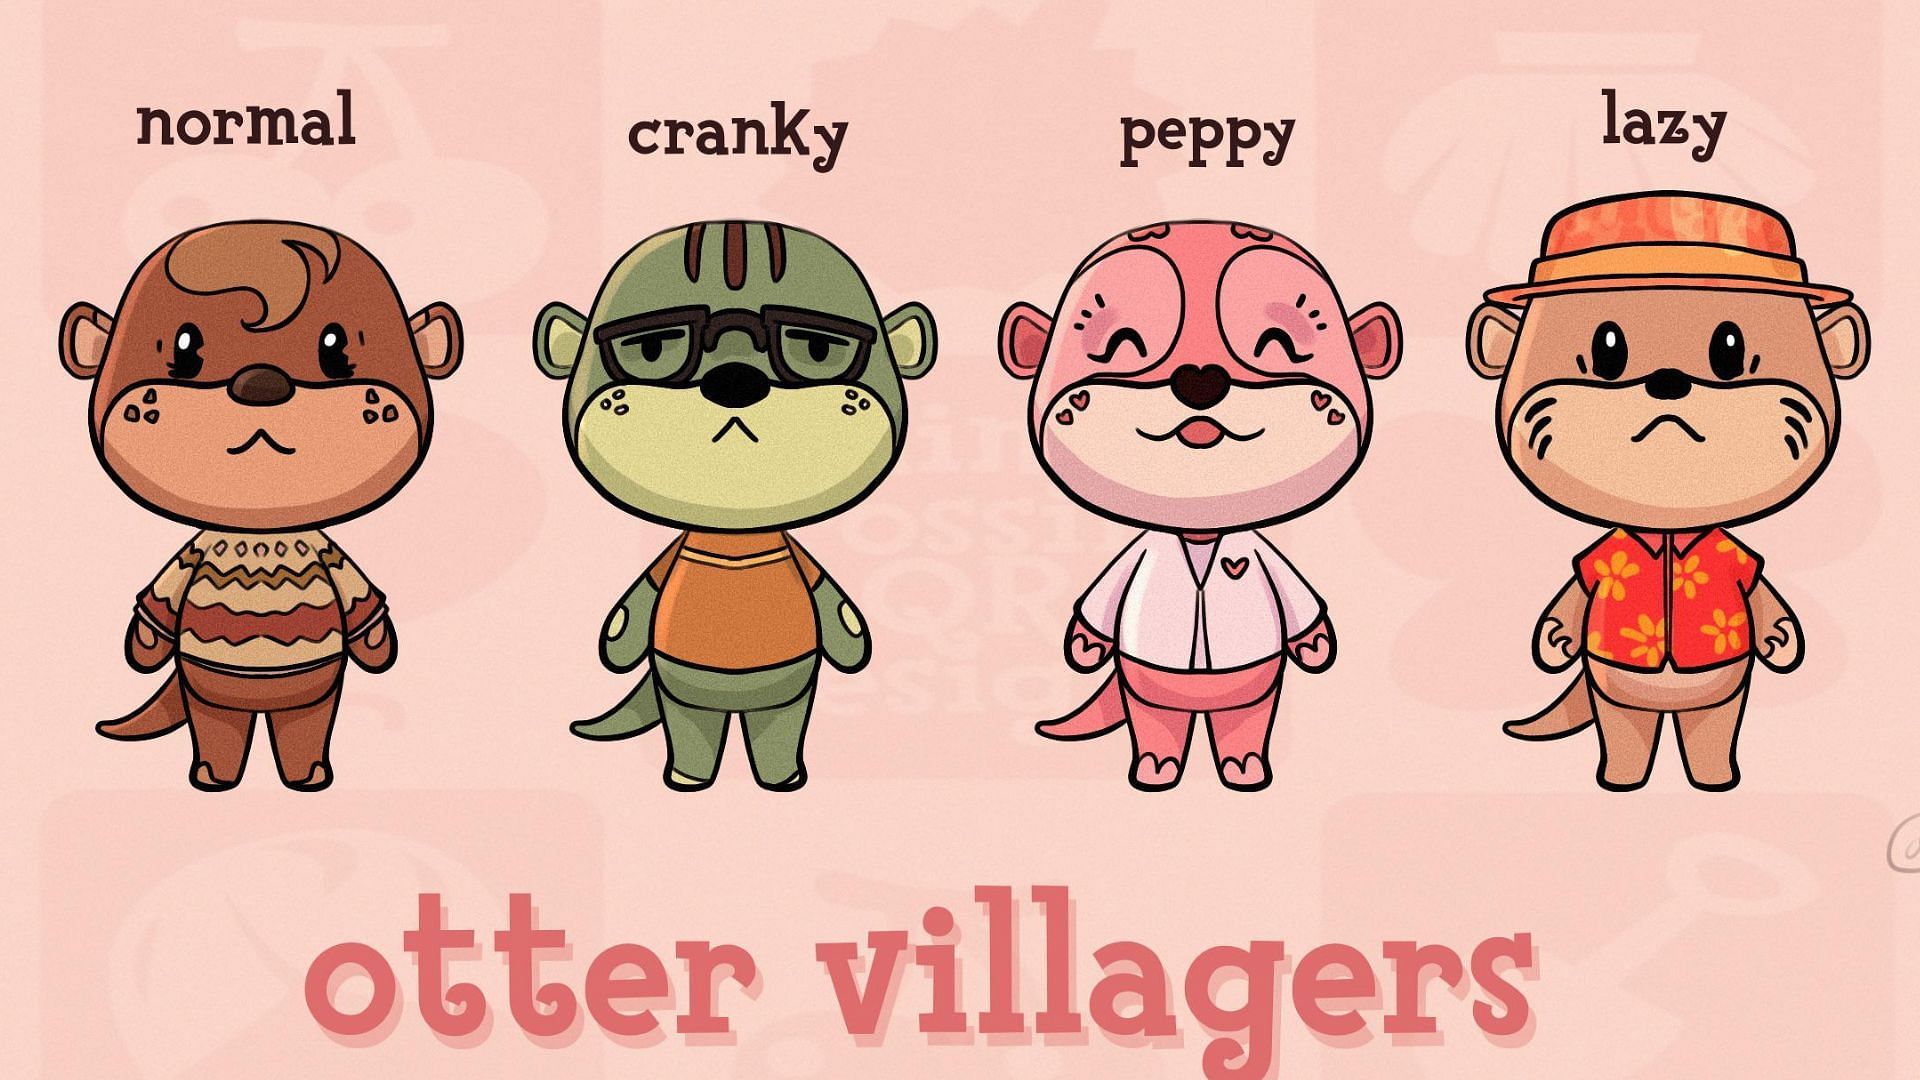 This Animal Crossing Redditor&#039;s idea of otter villagers is getting a lot of love (Image via u/iam_pinecone/Reddit)